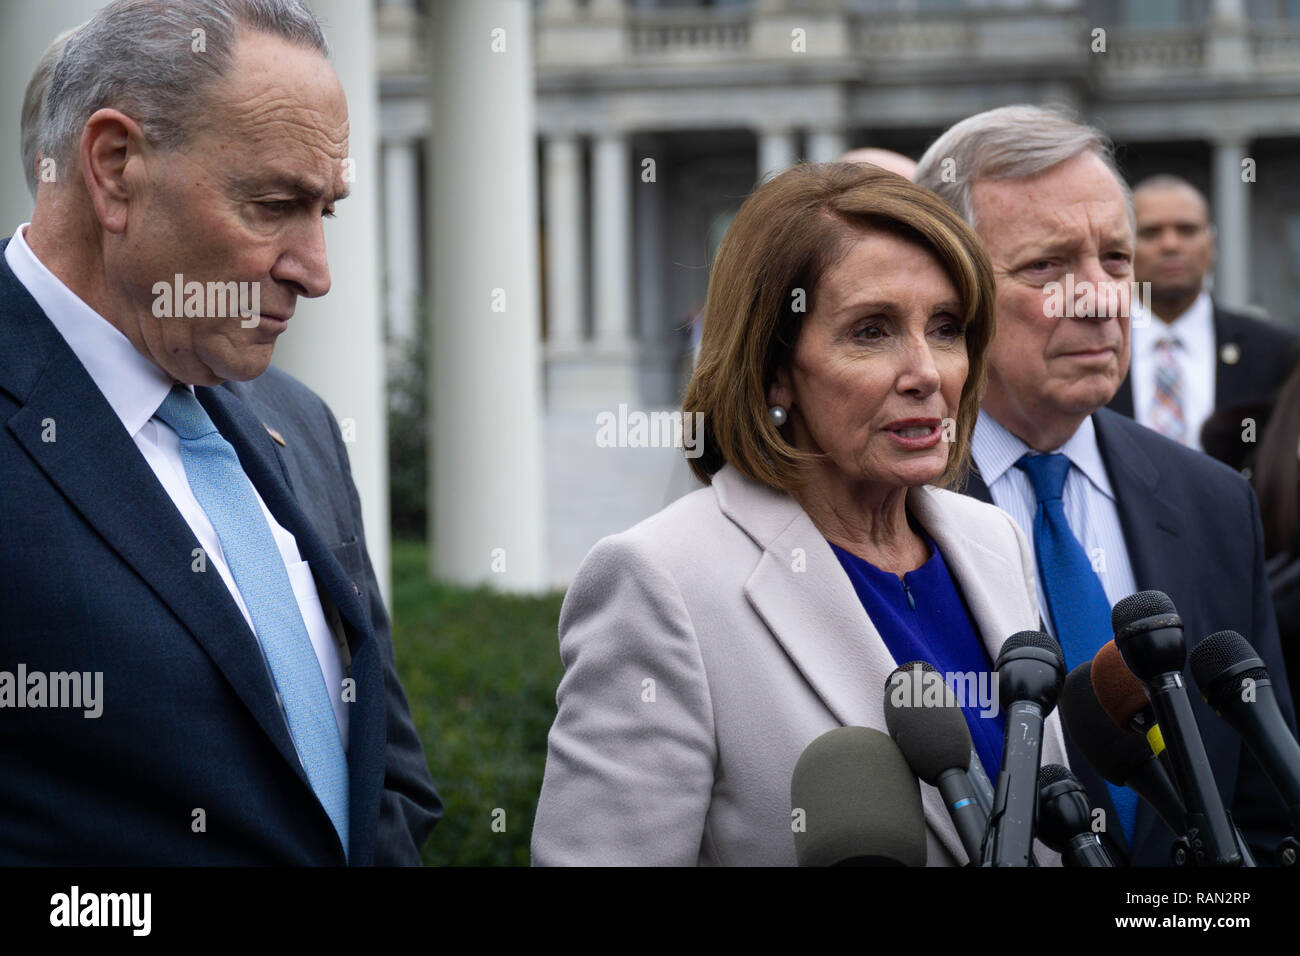 Washington DC, USA. 4th January, 2019. Speaker of the House Nancy Pelosi, flanked by the other Democratic leaders in Congress, addresses the media after meeting with Republicans and President Donald Trump in an attempt to work out a compromise to end the partial government shutdown, January 4, 2019. Credit: Michael Candelori/Alamy Live News Stock Photo